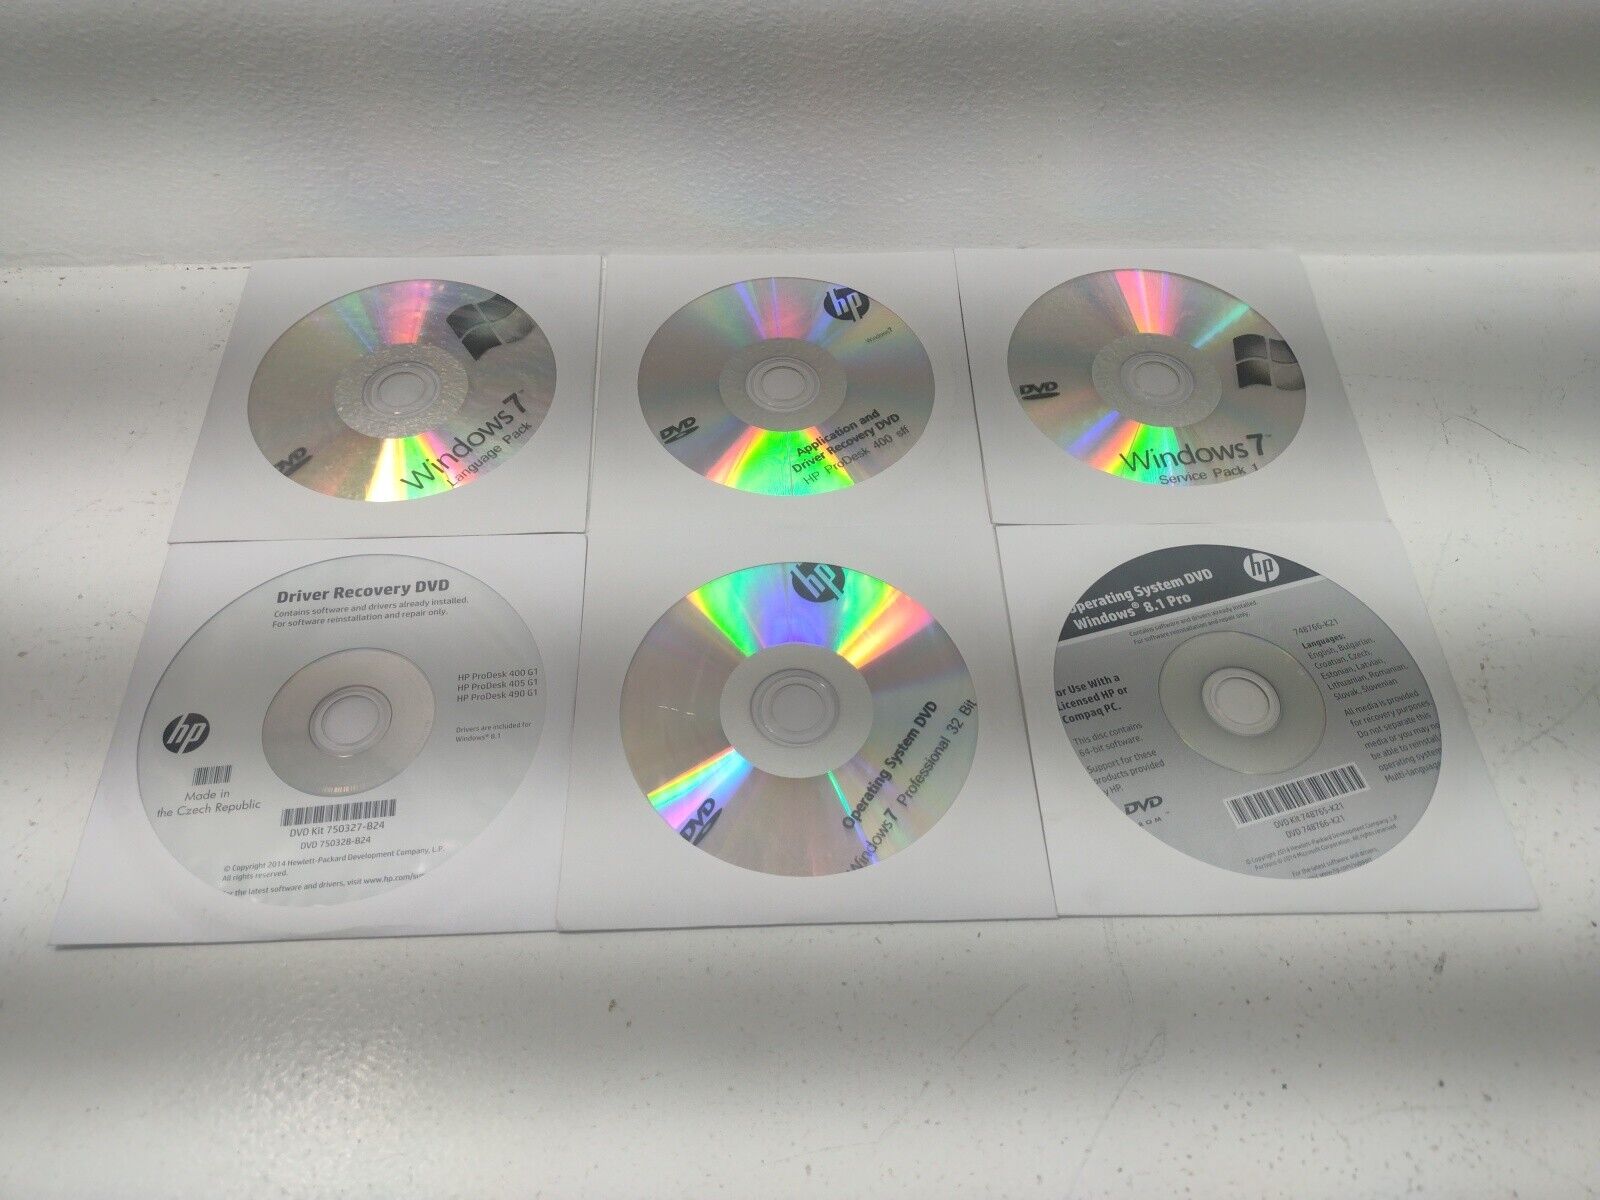 Lot of 6 HP Compaq Windows 7/8.1 DVD's Discs Operating System App Recovery Etc..